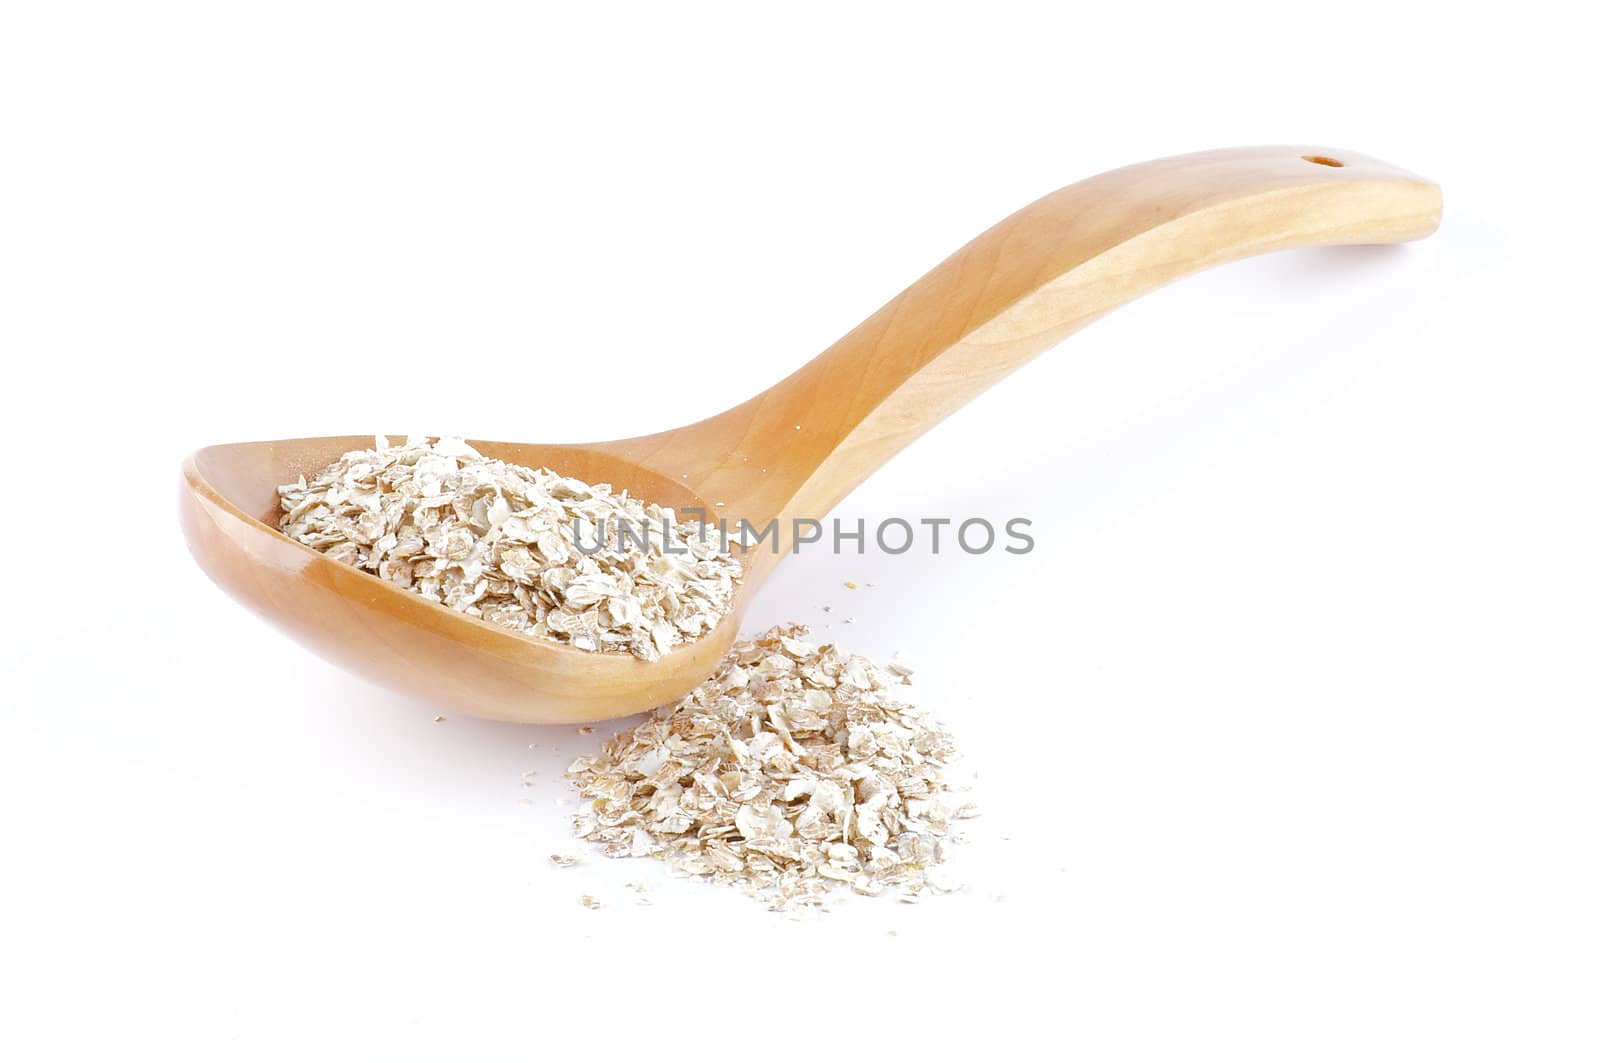 Oat meal cereal mixed in wooden spoon close up on white background